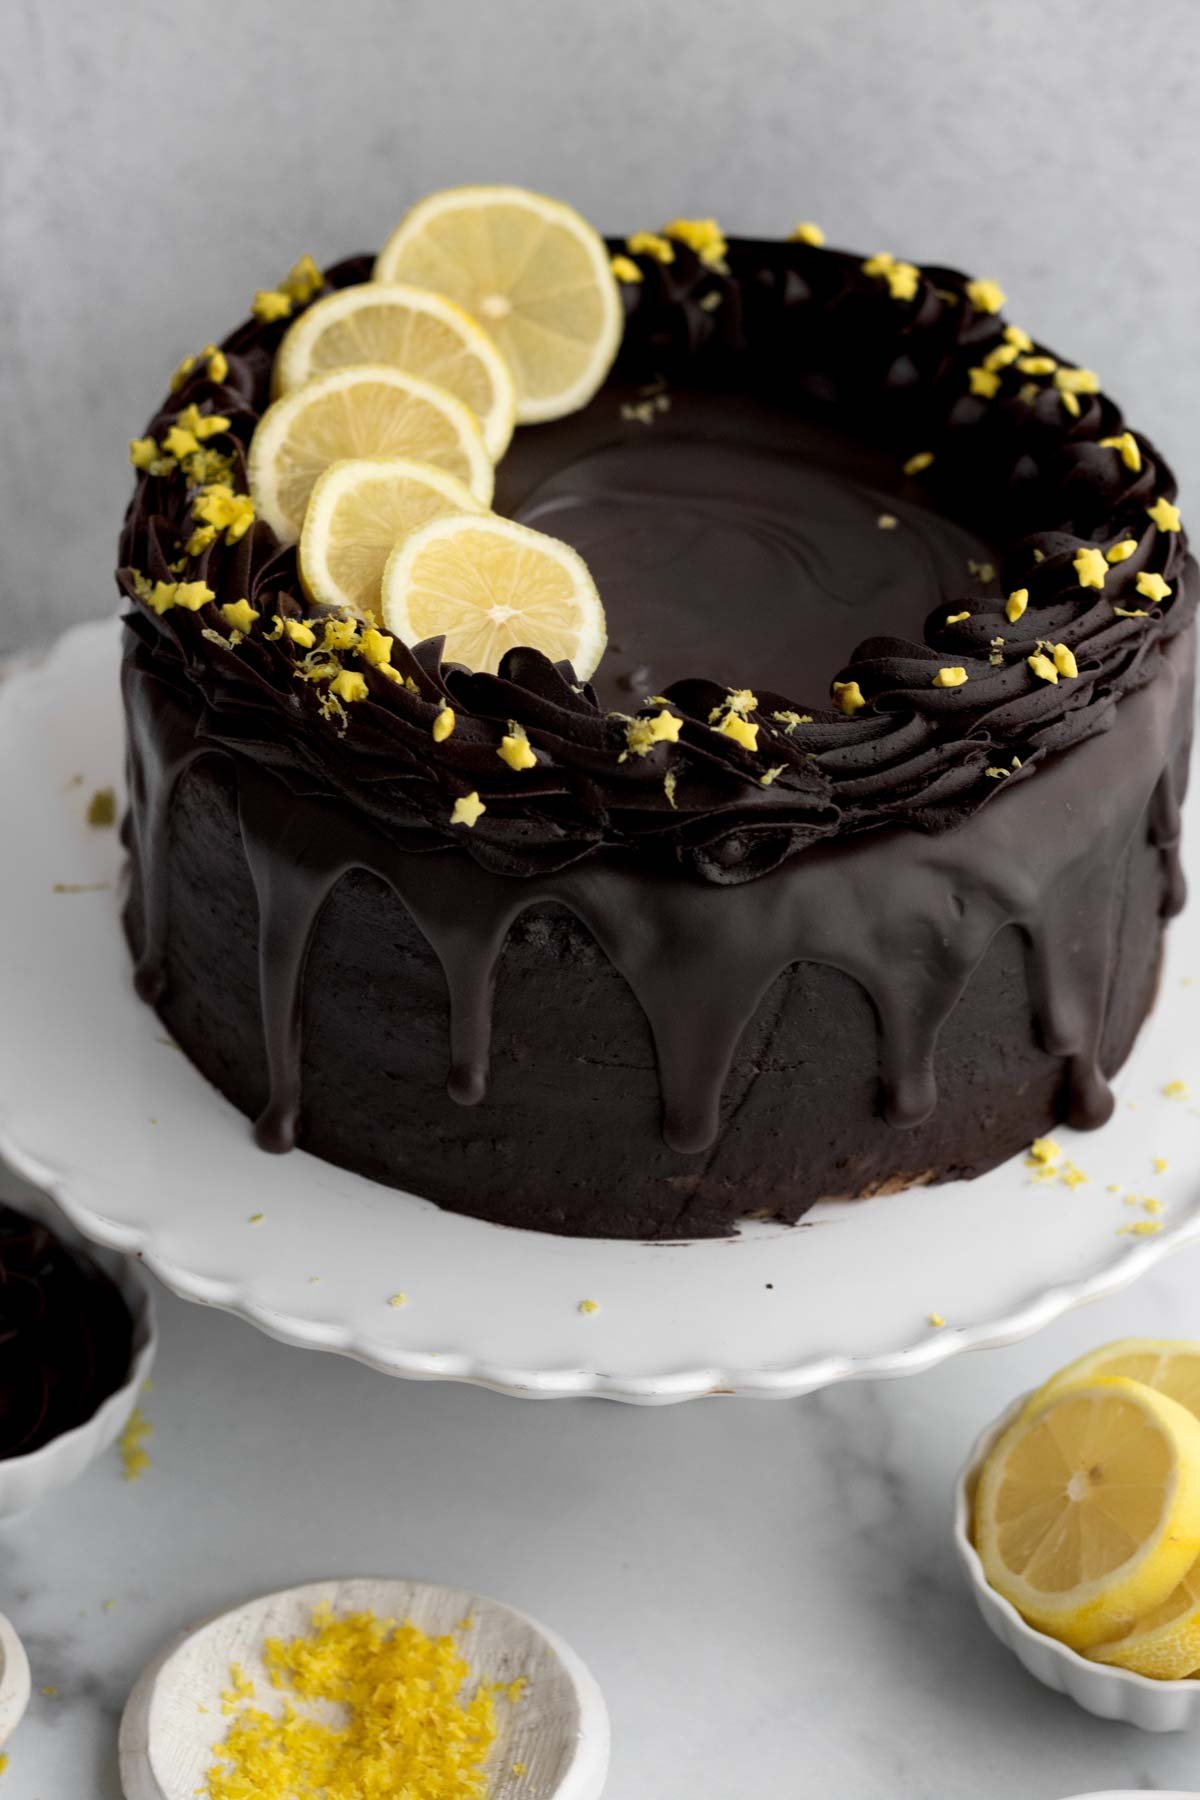 Cake dripping with chocolate and topped with lemons, zest and sprinkles.